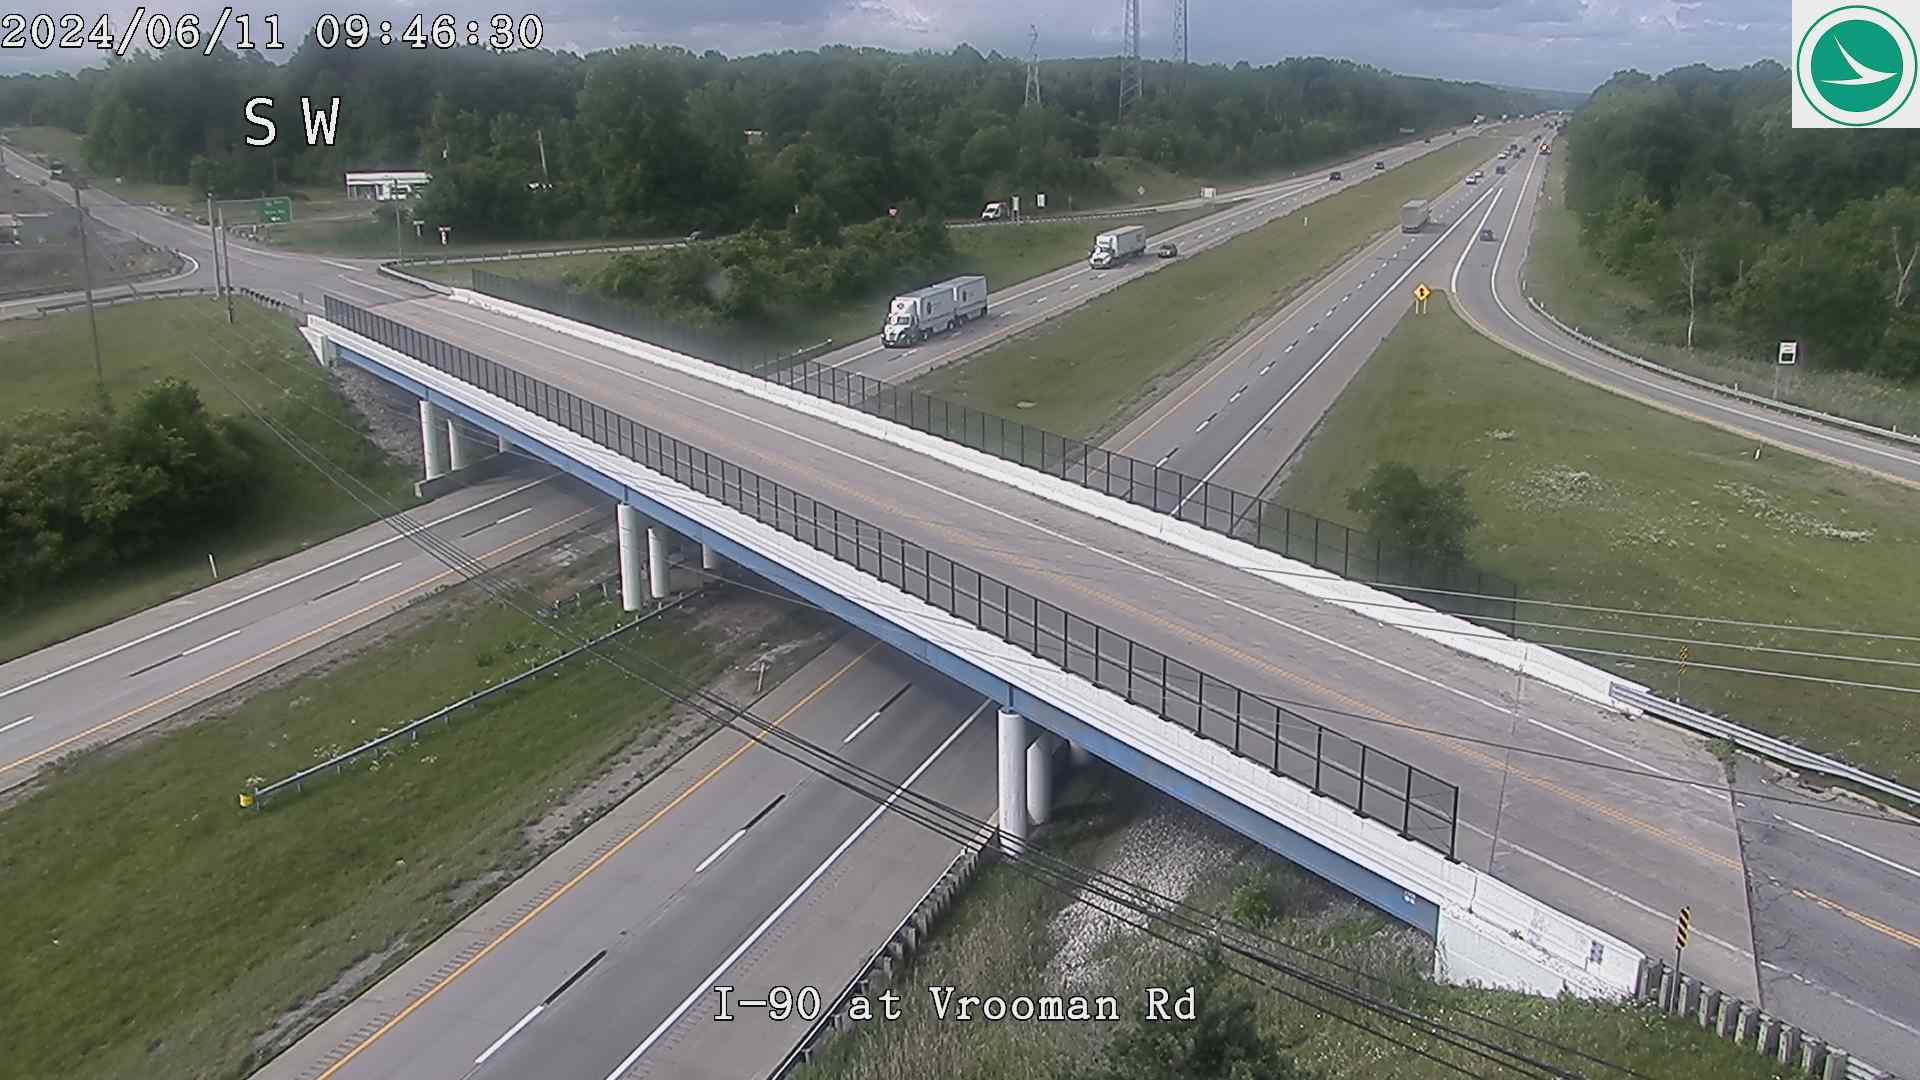 Traffic Cam Five Points: I-90 at Vrooman Rd